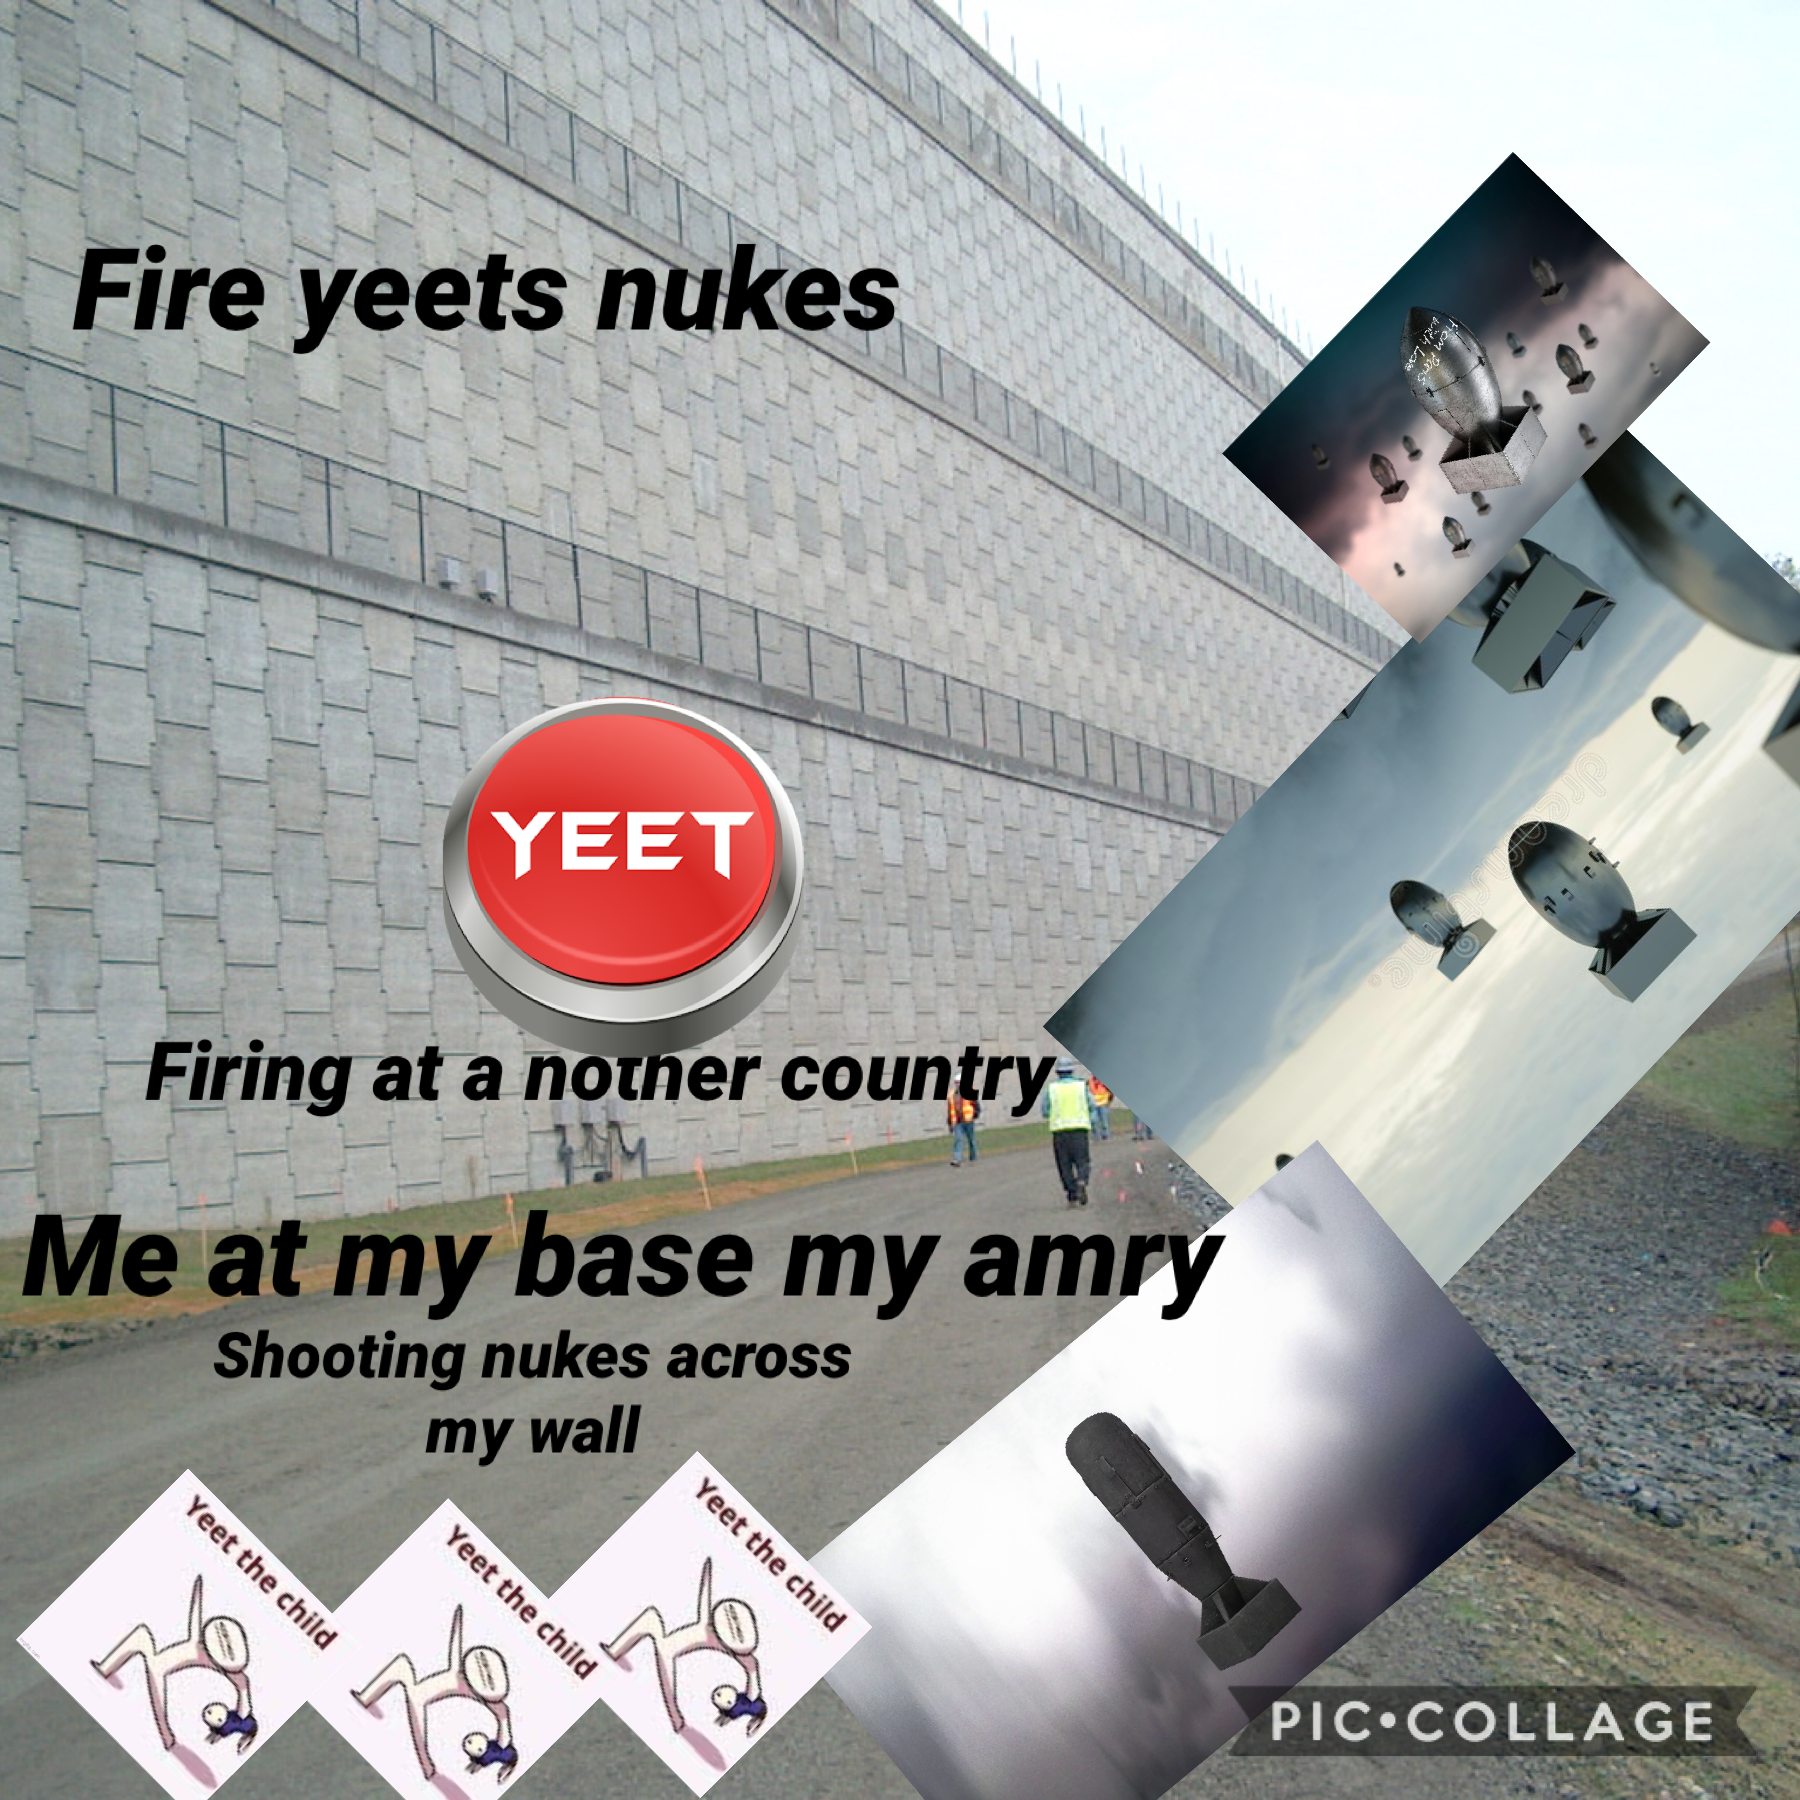 YEEt nukes have been fired 